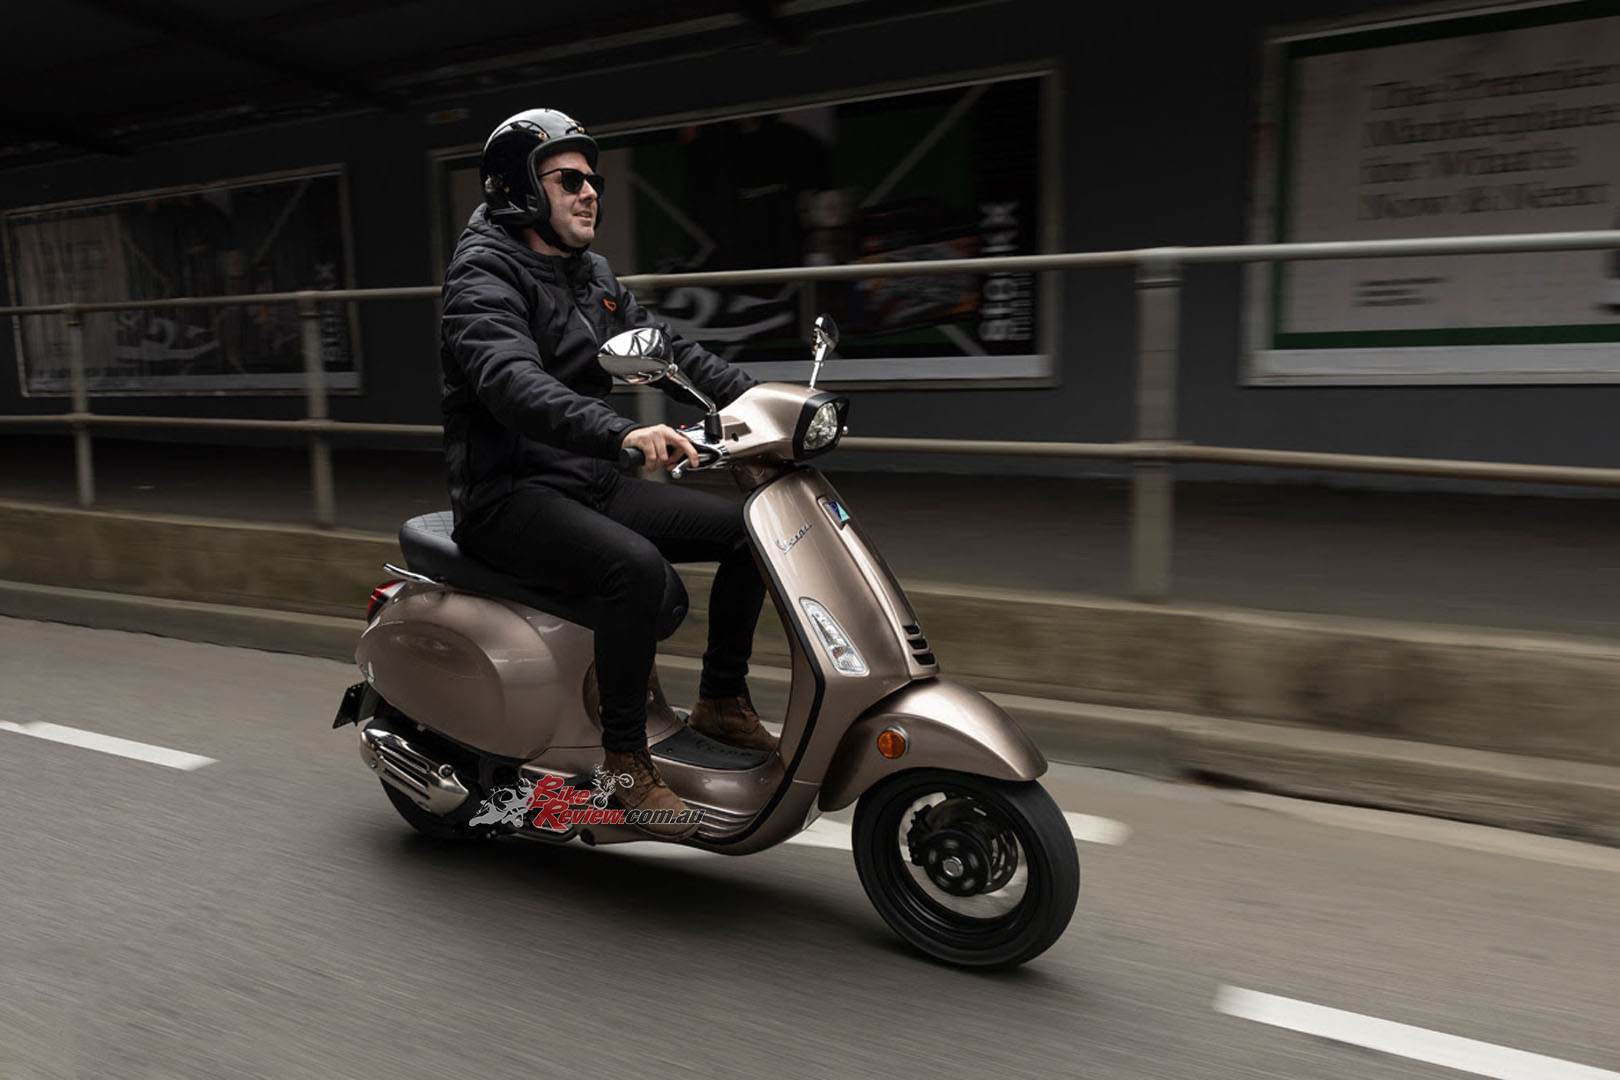 Vespa have updated their Sprint S model for 2022. Now with and eye-catching, yet subtle, Bronzo Antico steel body and a TFT display.